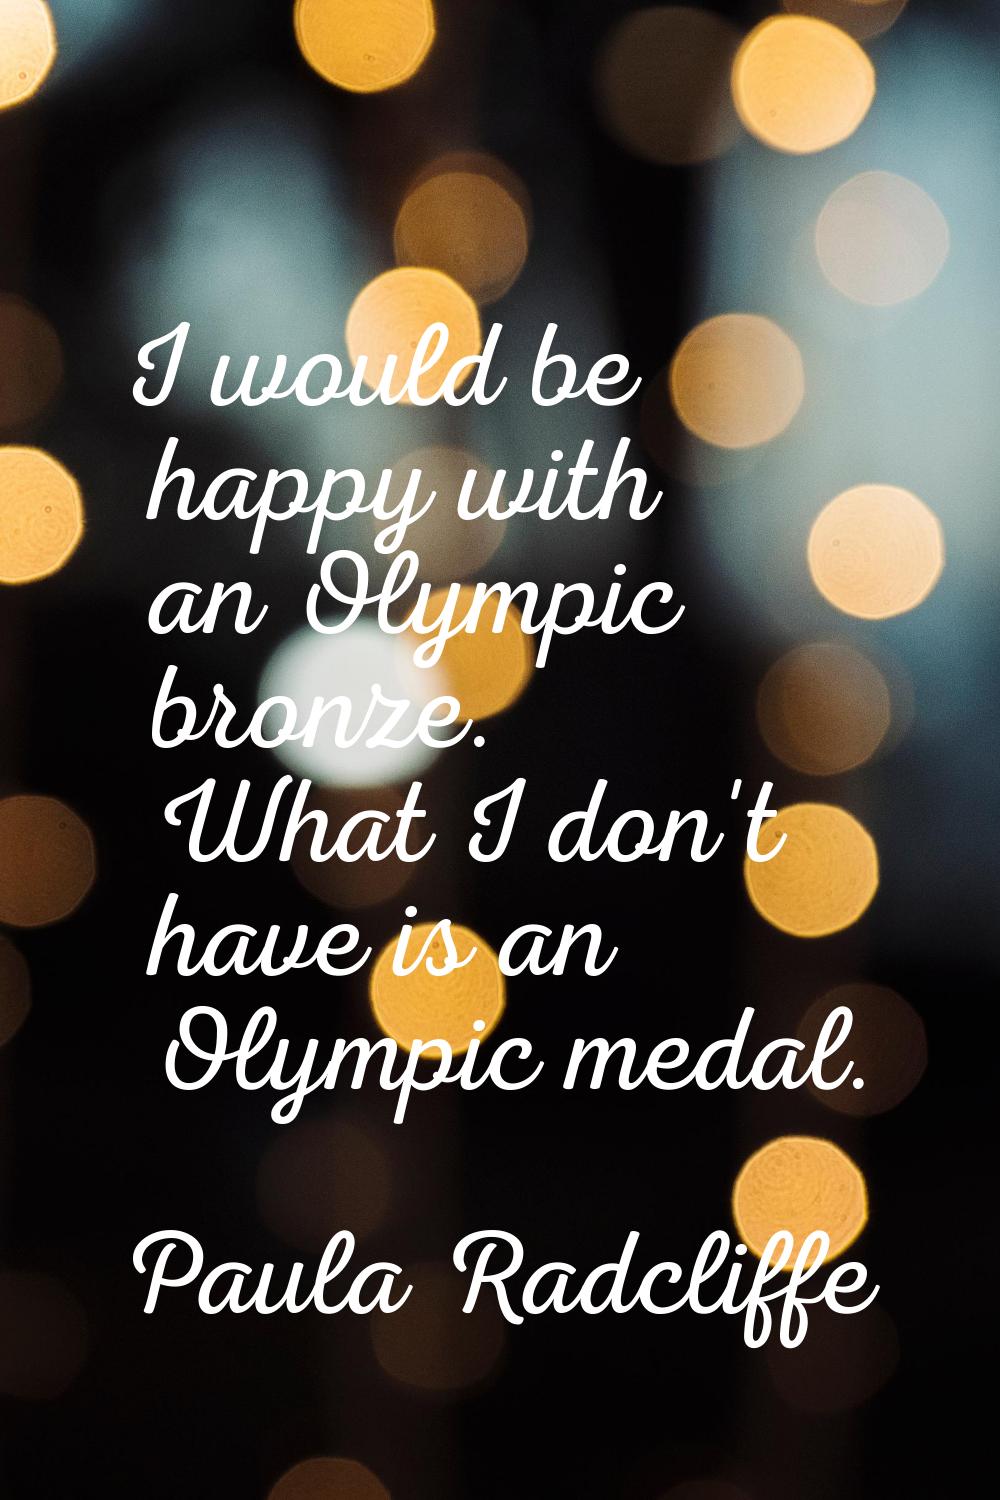 I would be happy with an Olympic bronze. What I don't have is an Olympic medal.